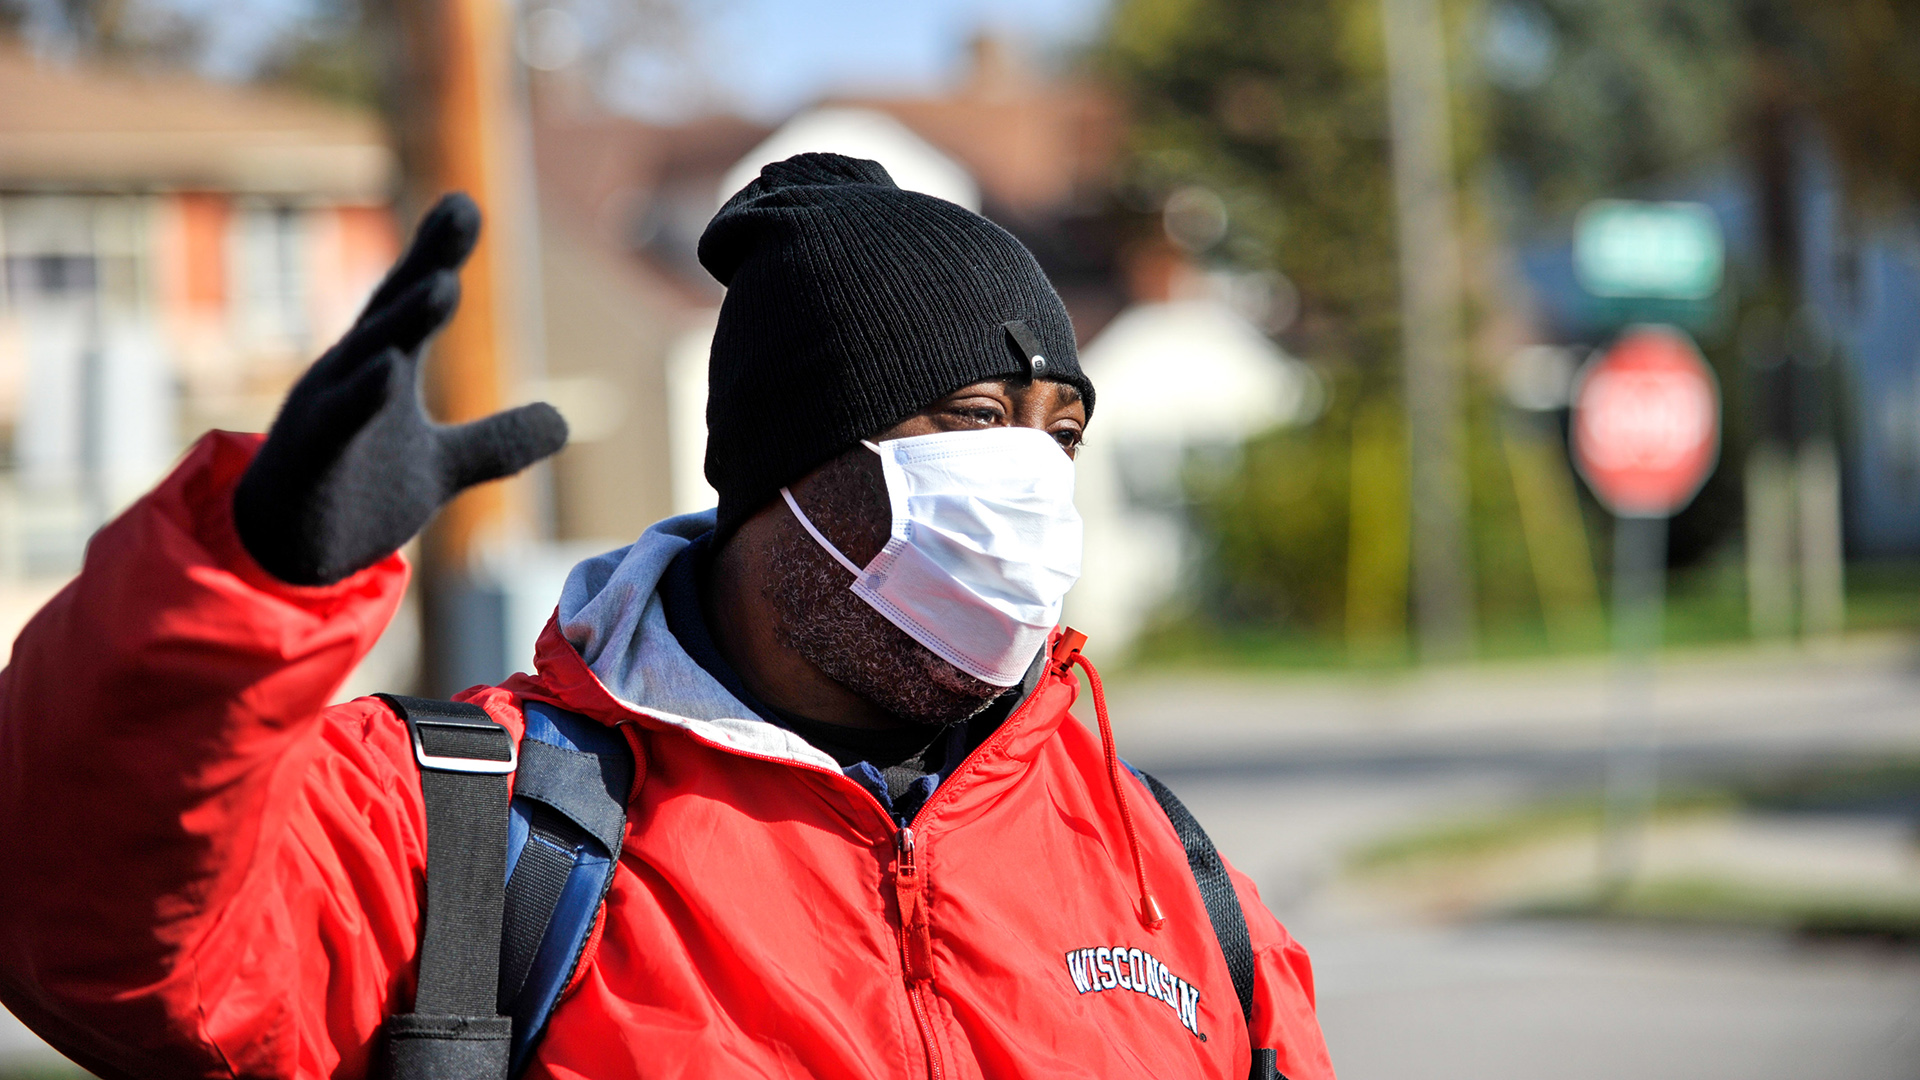 Madee wears a Wisconsin Badgers jacket, face mask and stocking cap, standing next to a street and holding a hand up in the air.